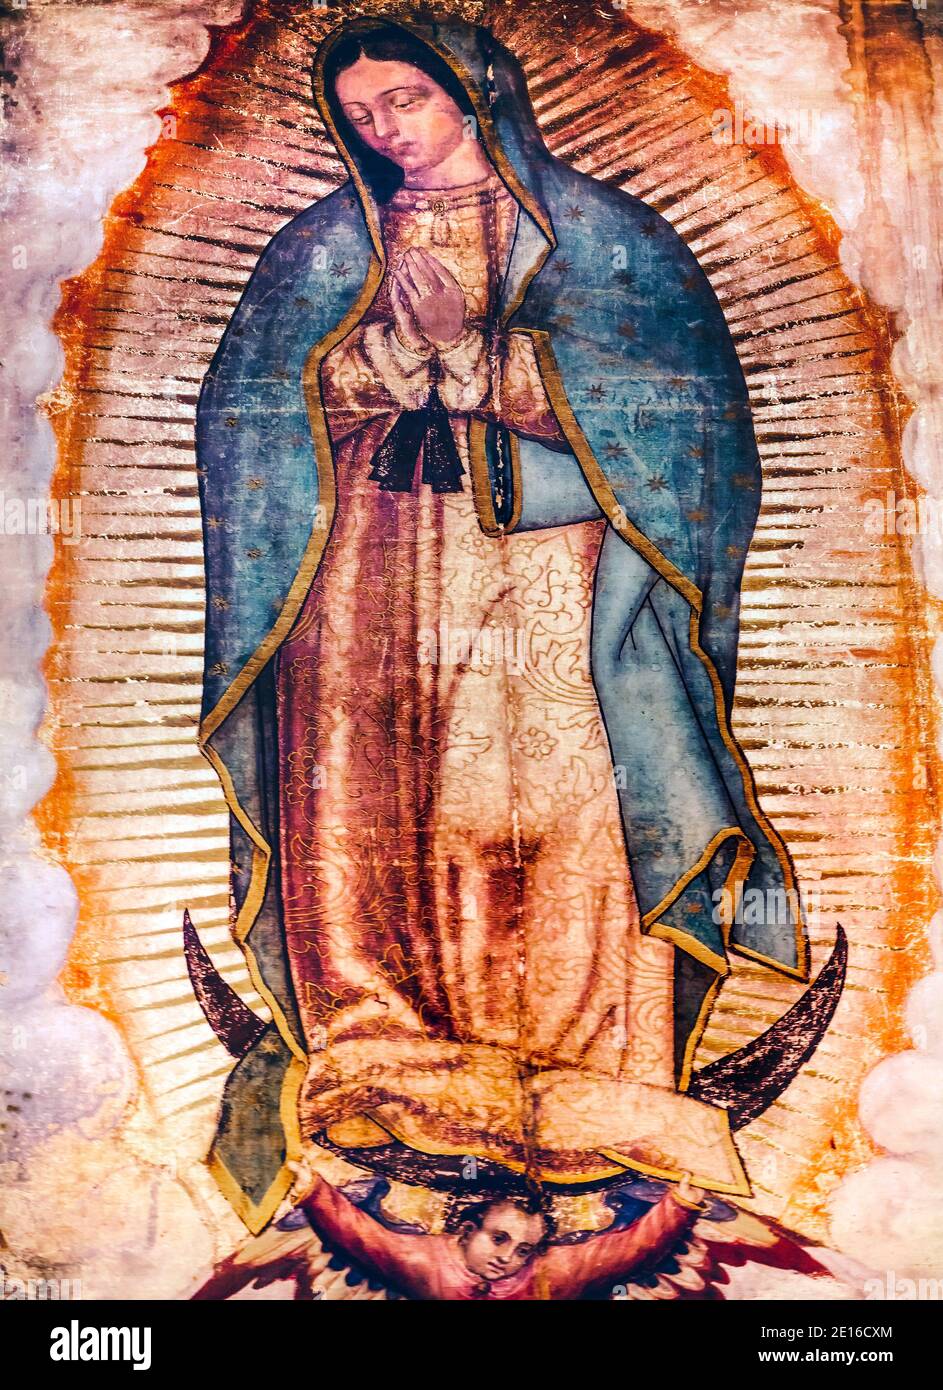 Original Virgin Mary Guadalupe Painting which was revealed by Indian Peasant Juan Diego in 1531 to Catholic Bishop. New Shrine of the Guadalupe, Mexic Stock Photo